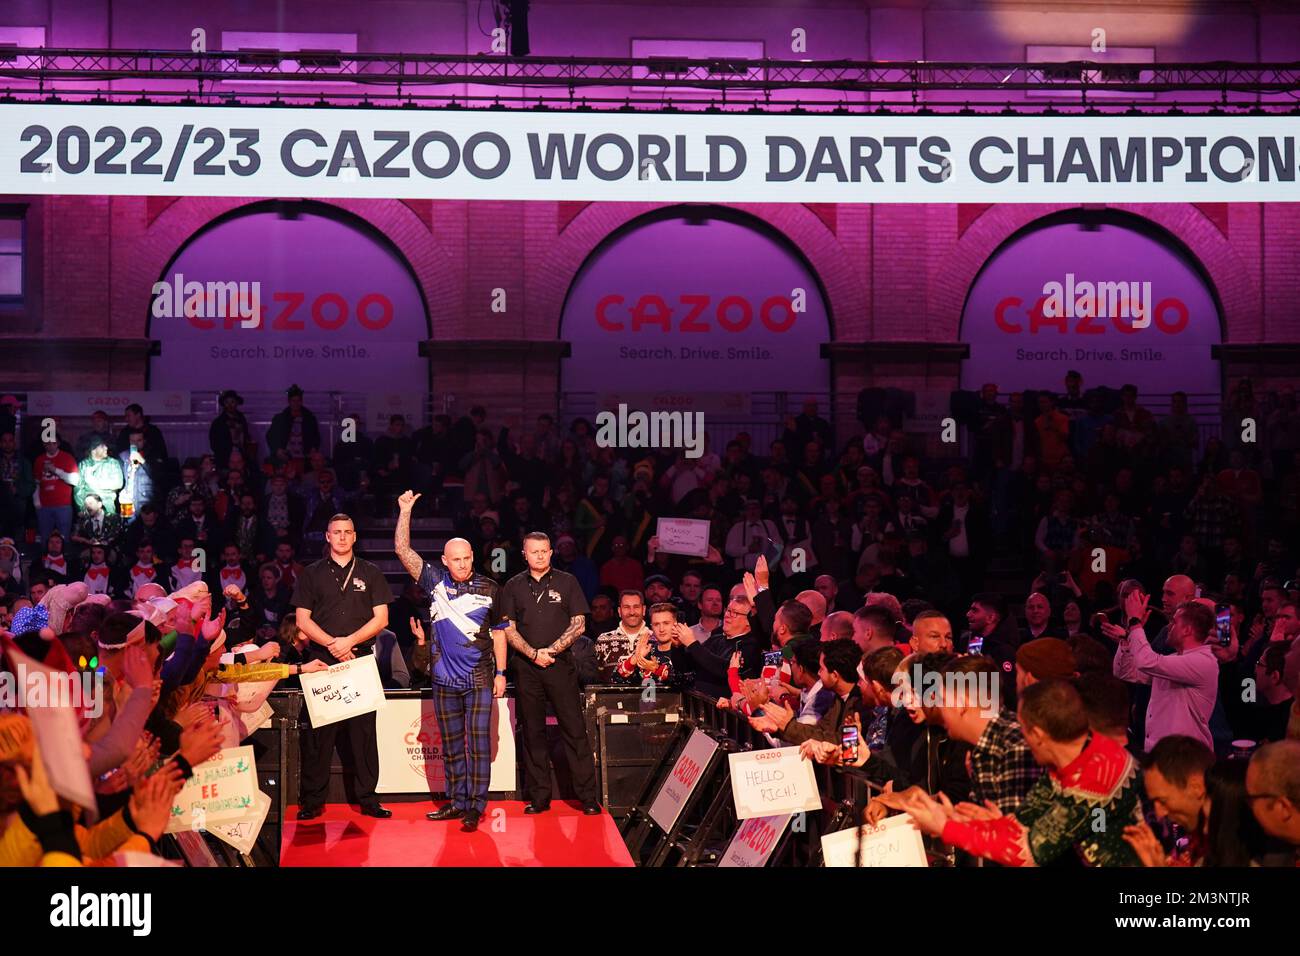 2022/23 Cazoo World Darts Championship schedule of play